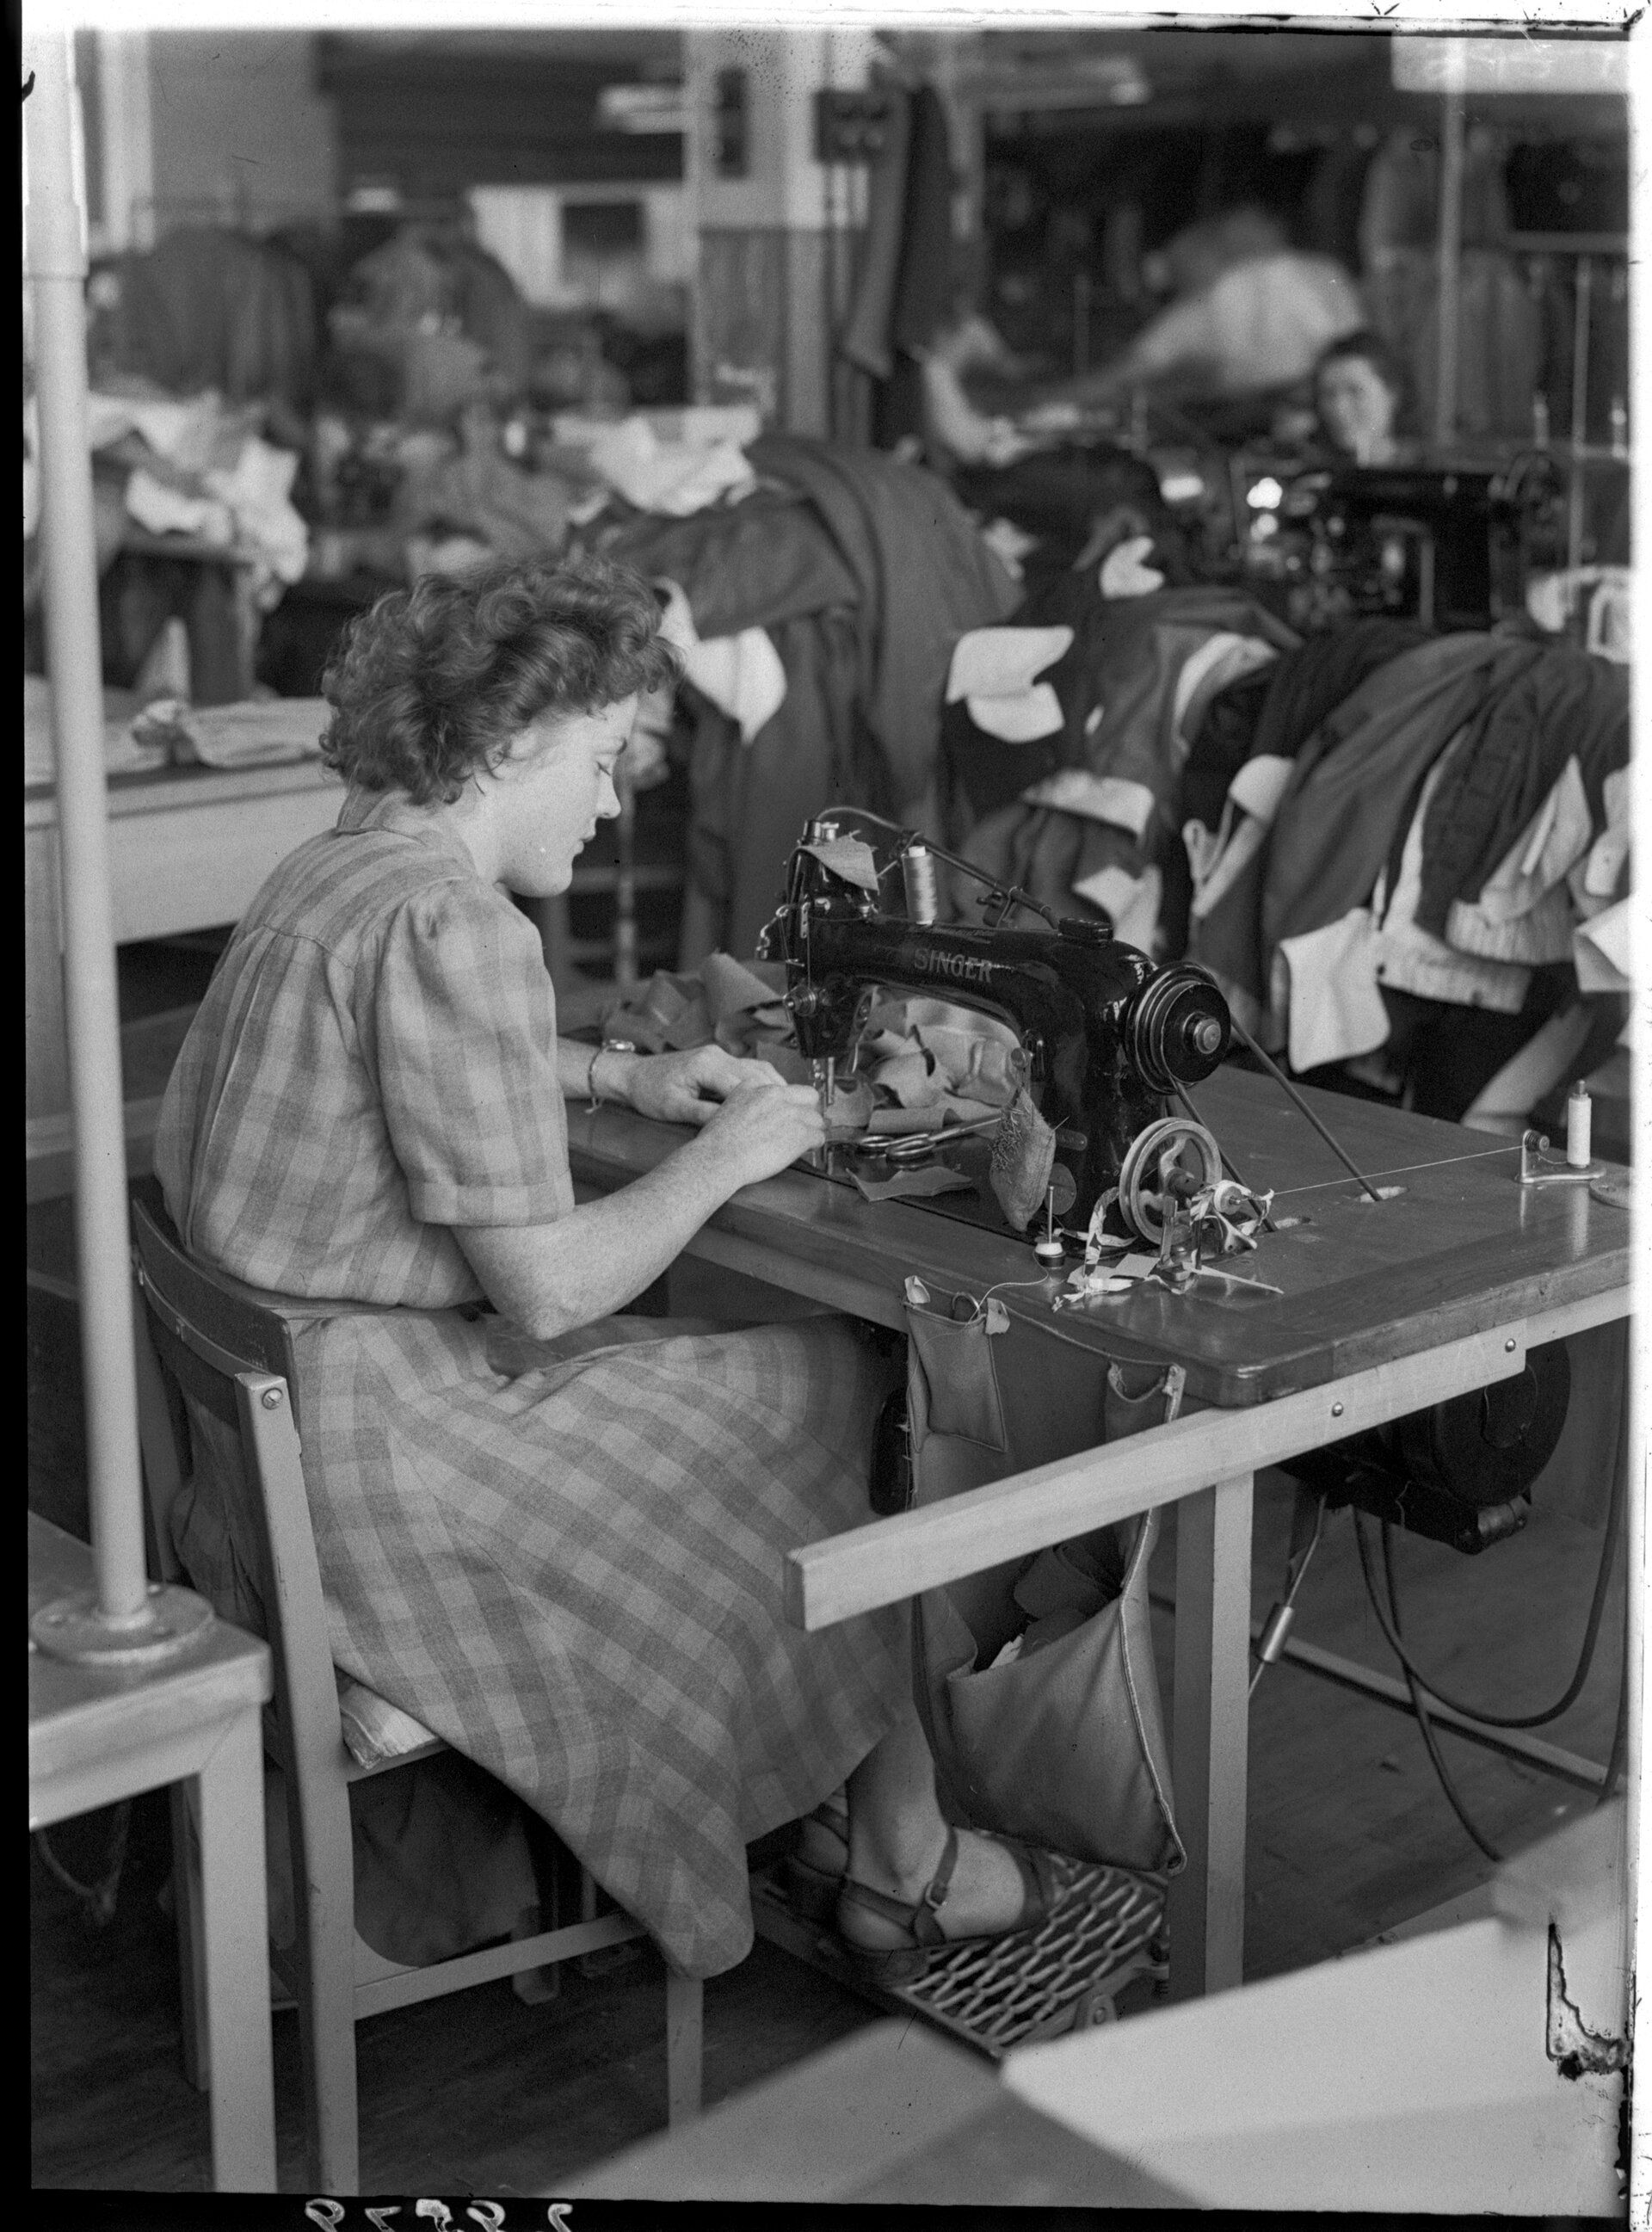 Fabric workshop - woman sewing clothing